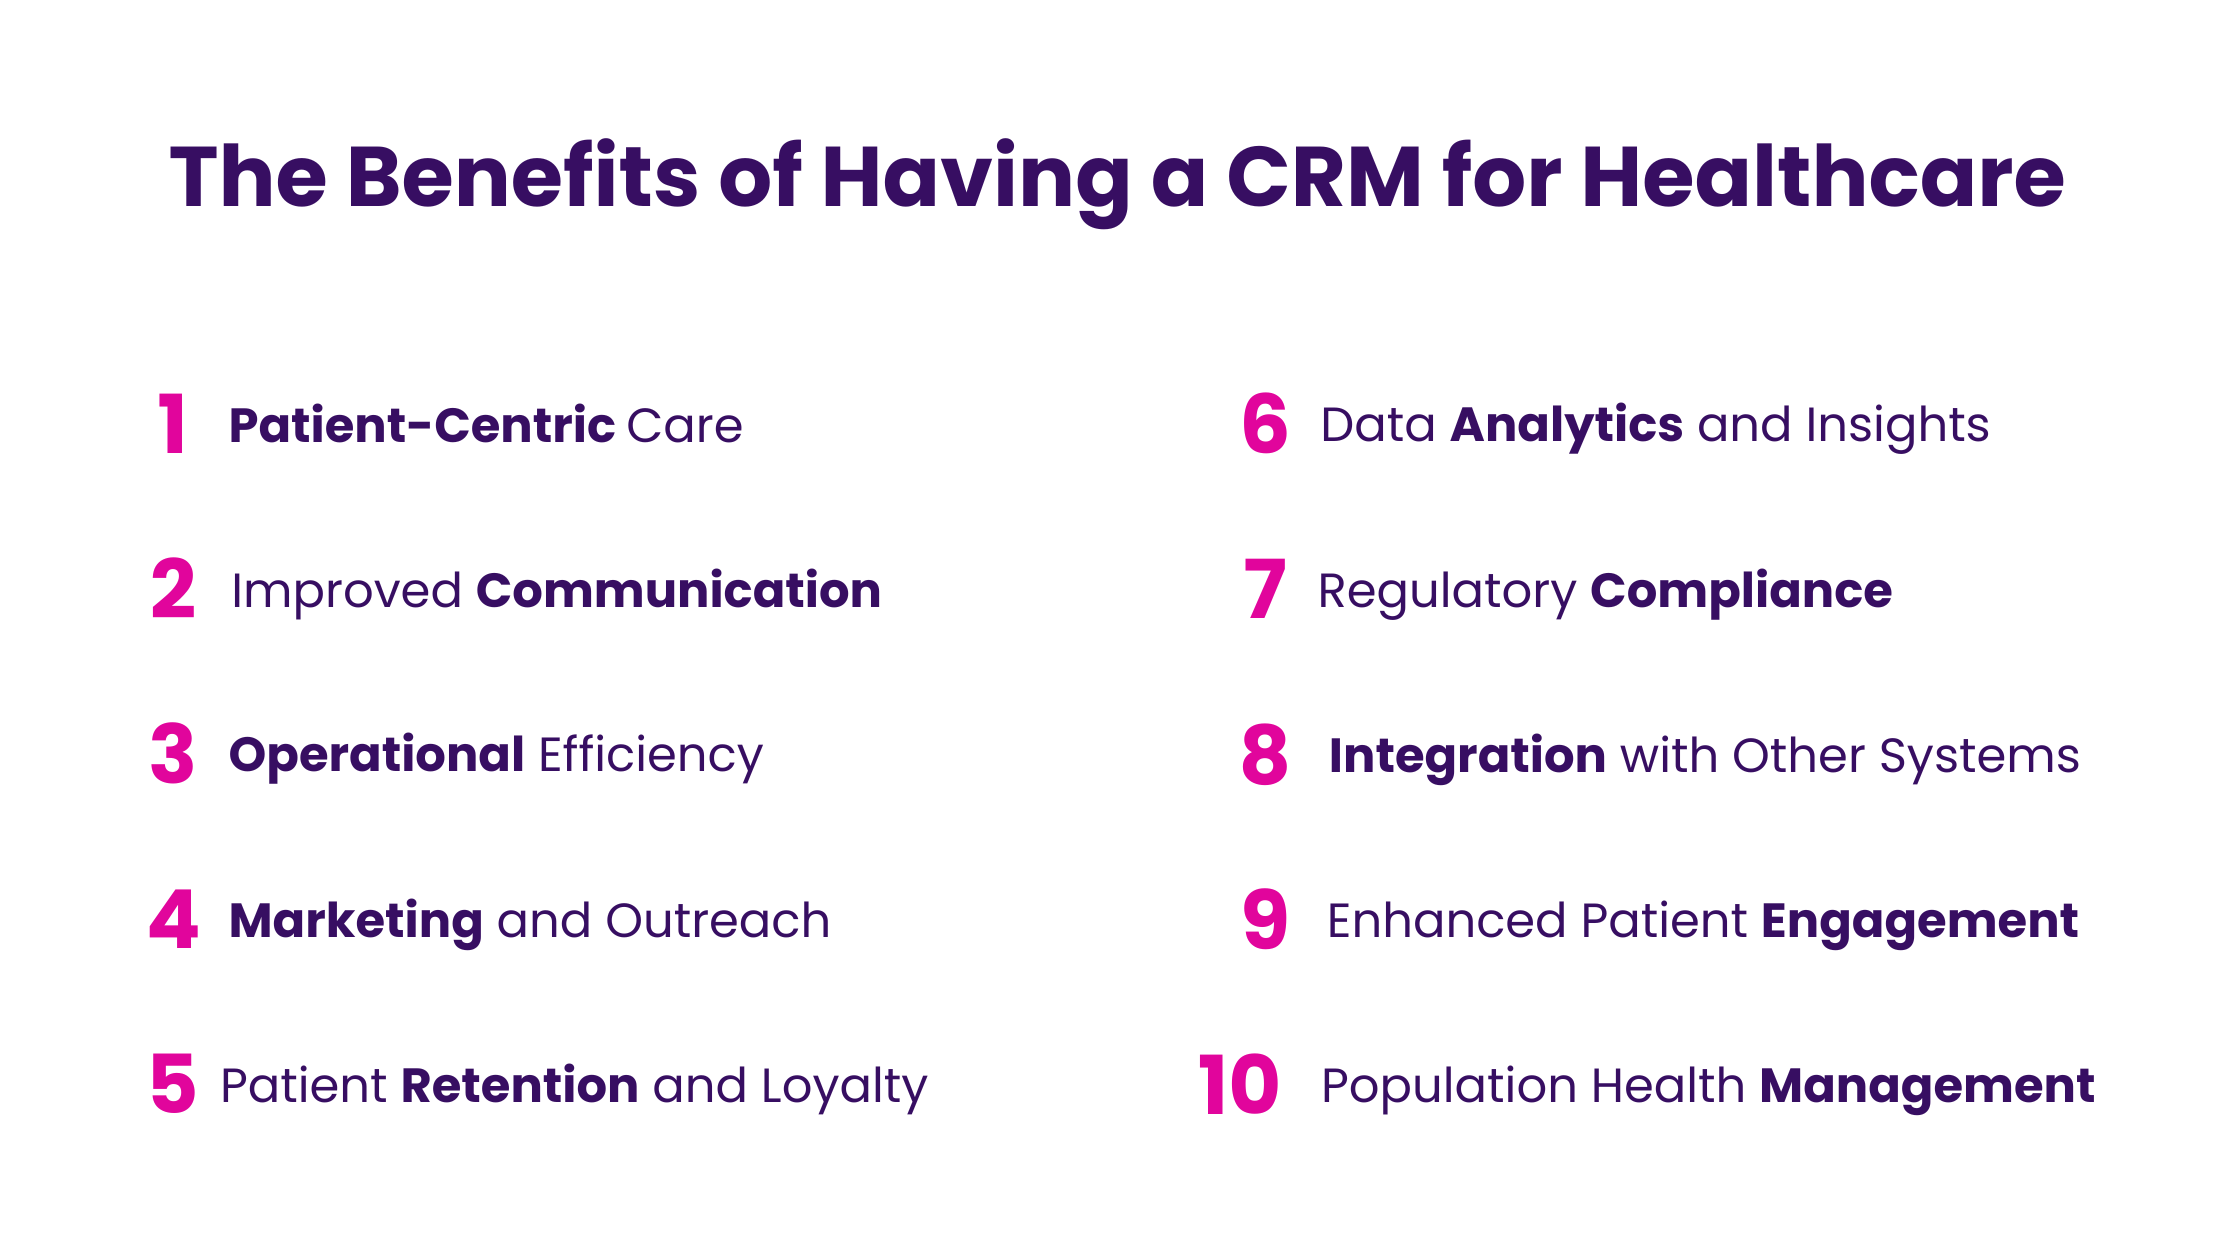 The Benefits of Having a CRM for Healthcare